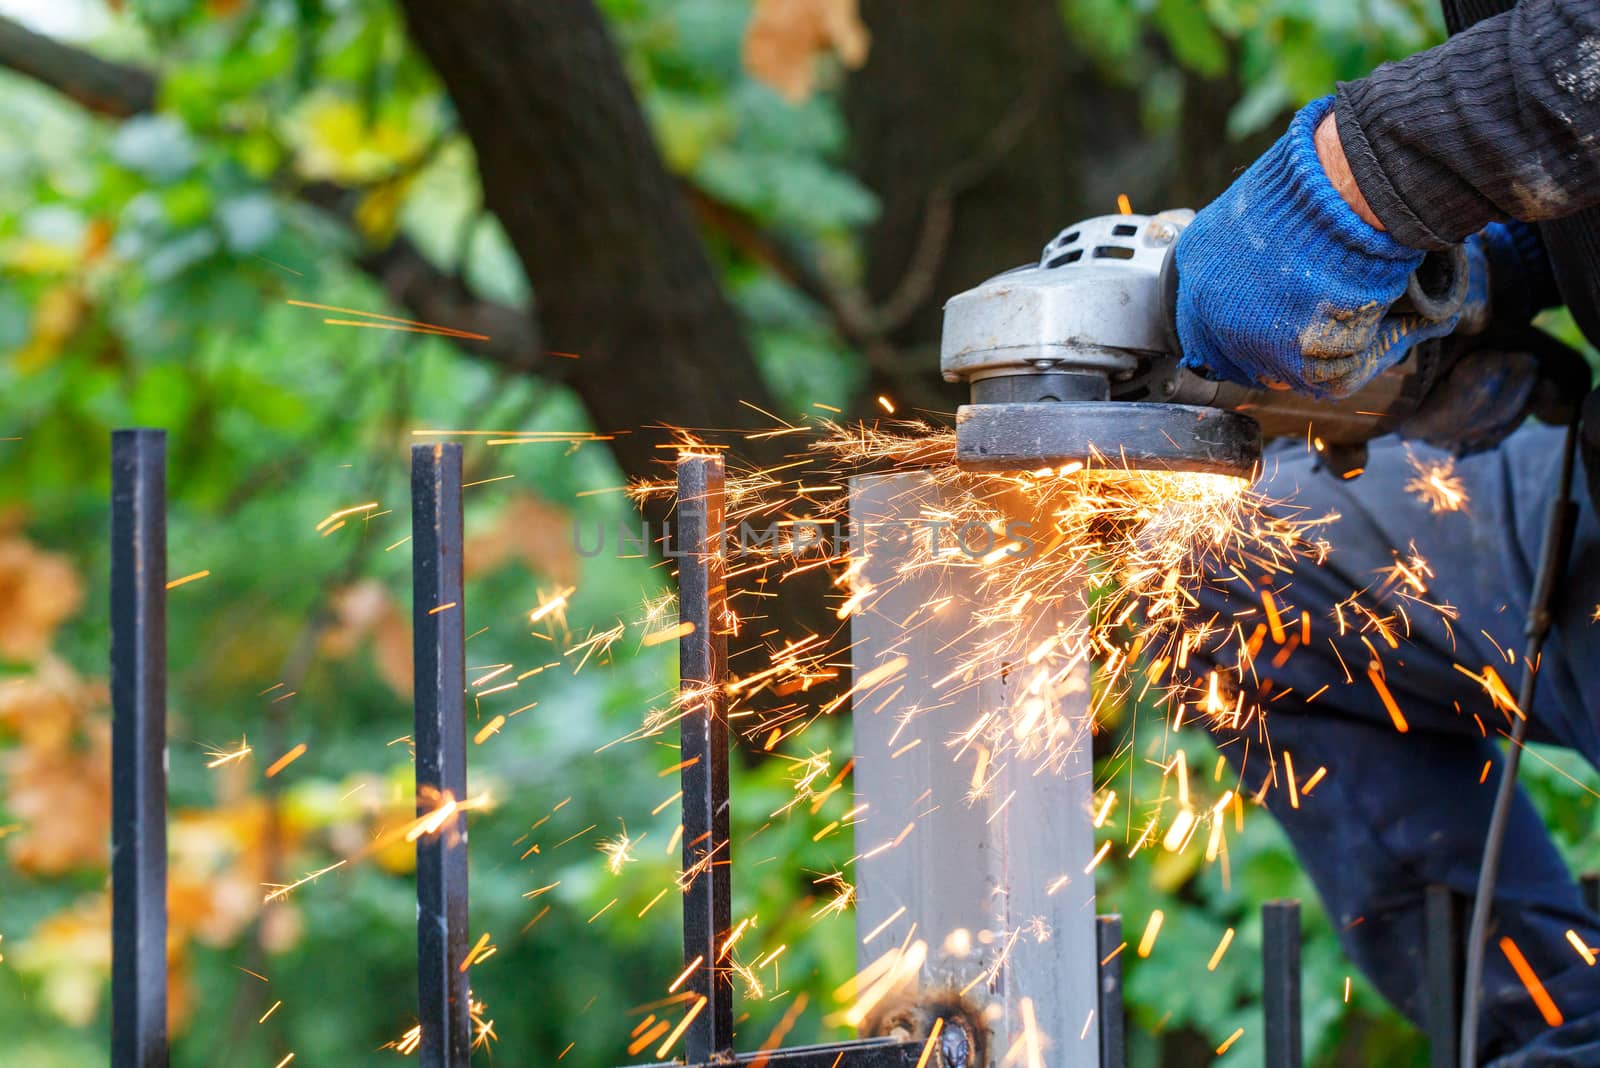 A bright plume of many hot sparks scatters as an artisan works, cutting a metal post with a disc angle grinder against a blurred background of green park.